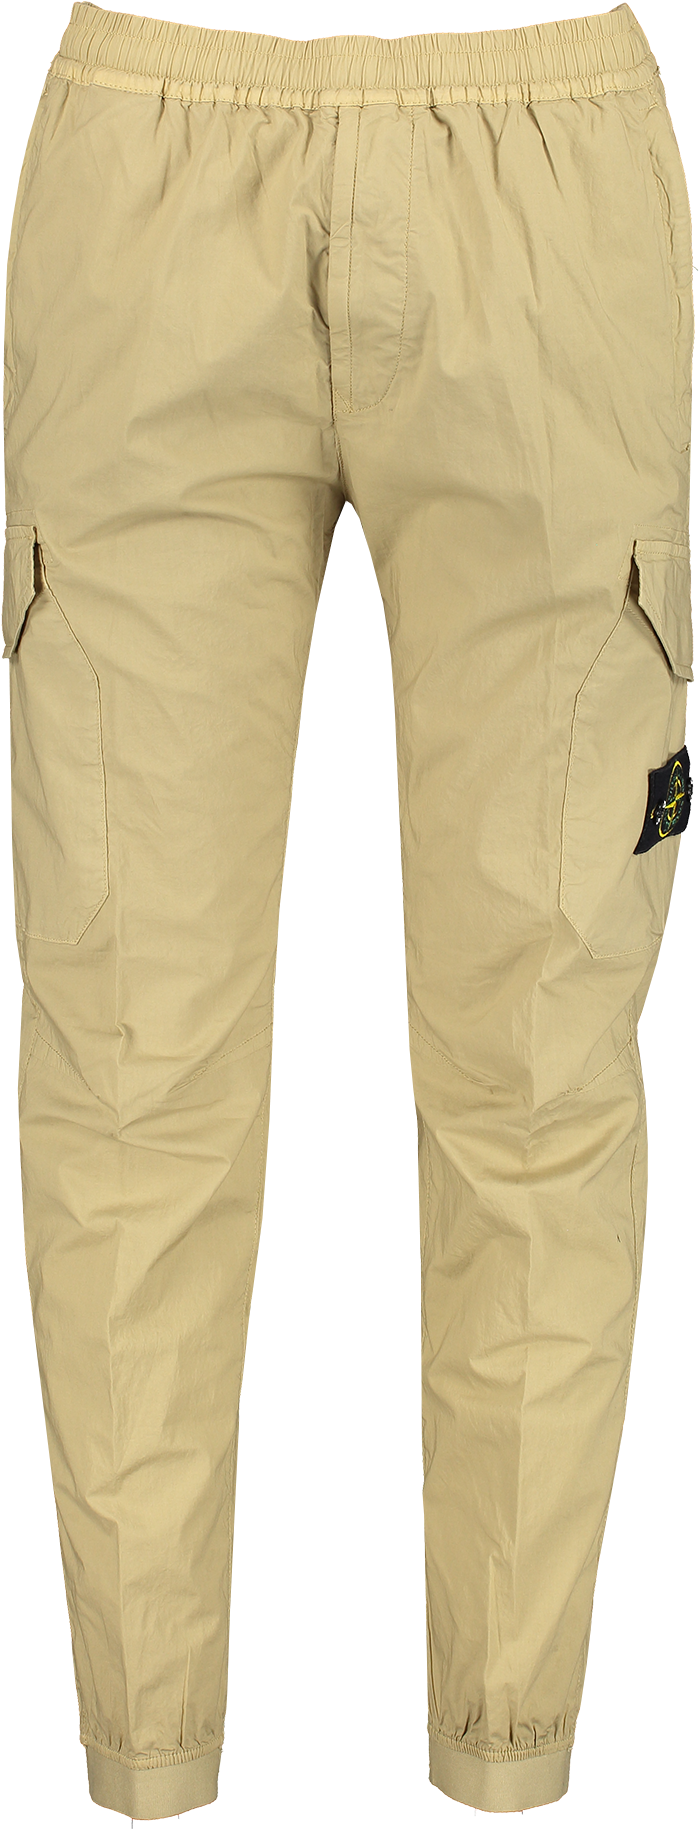 Beige Cargo Pants Isolated PNG